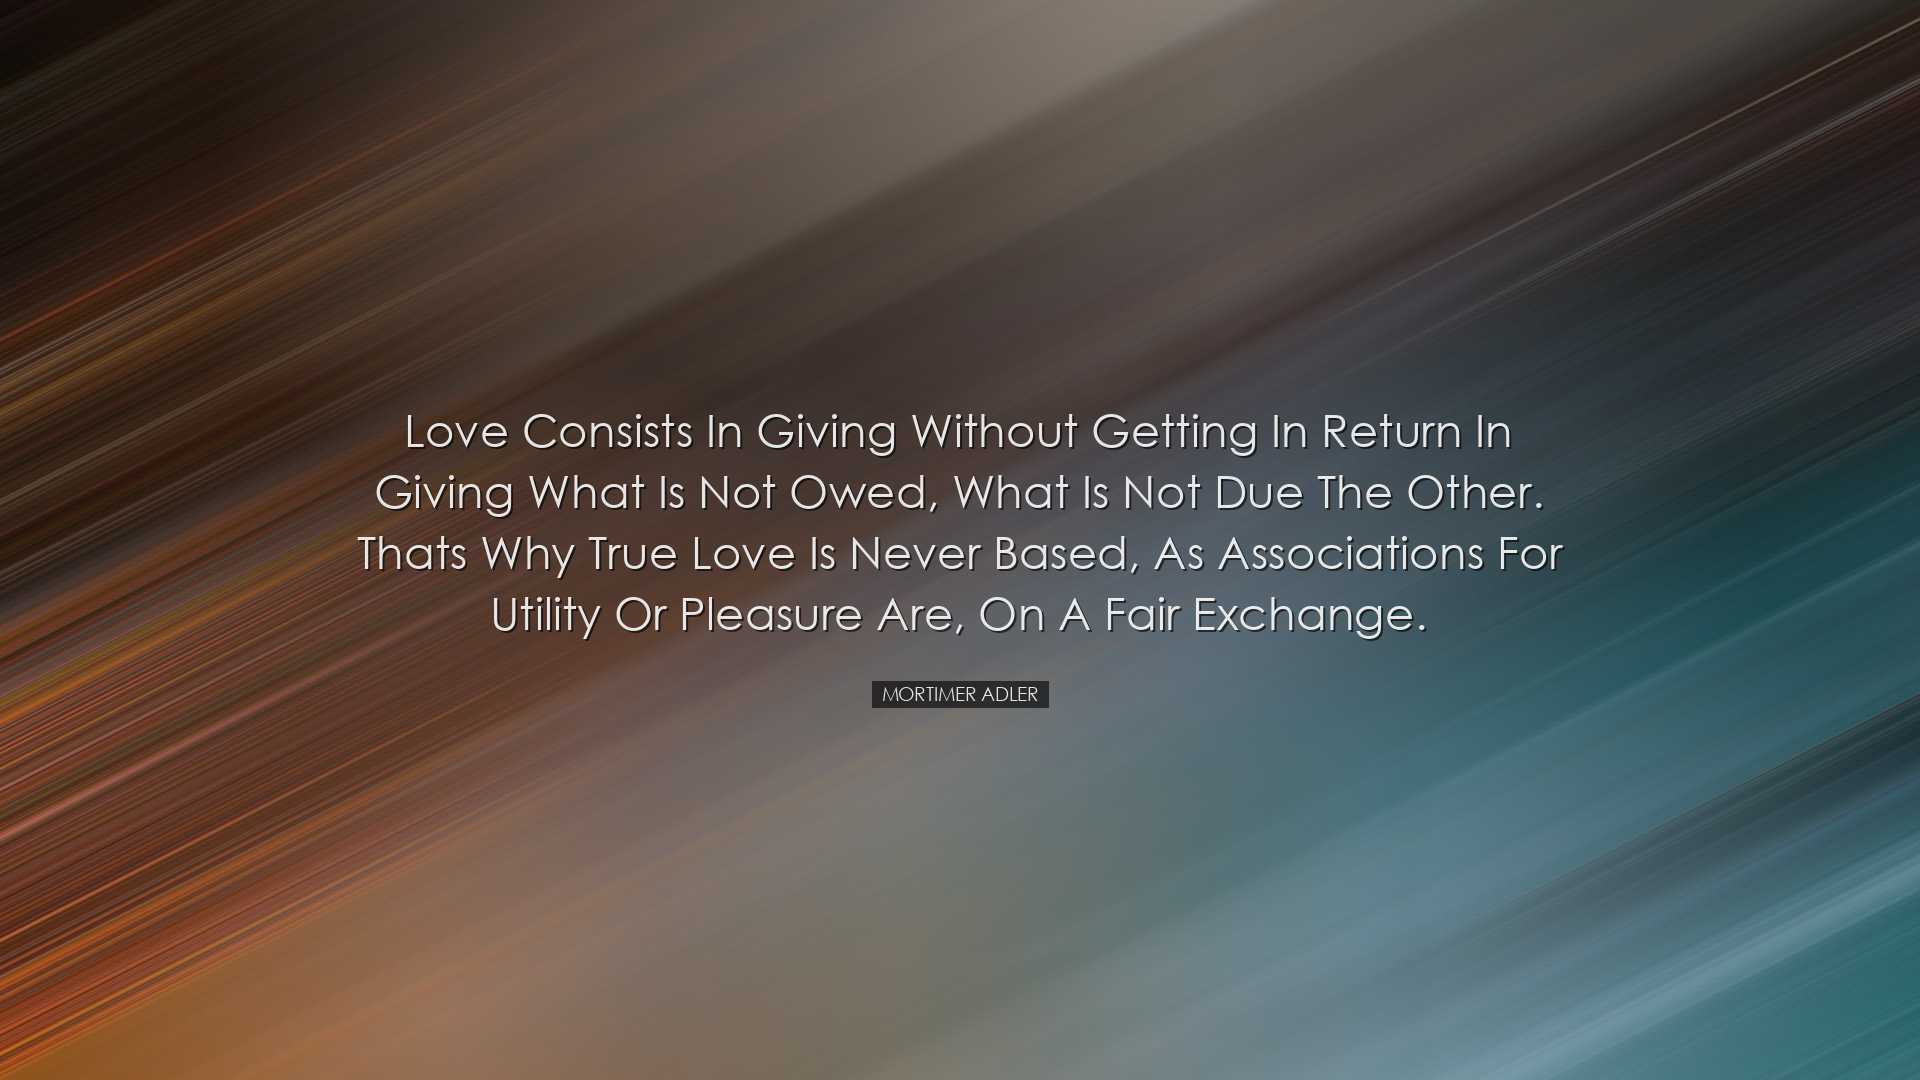 Love consists in giving without getting in return in giving what i